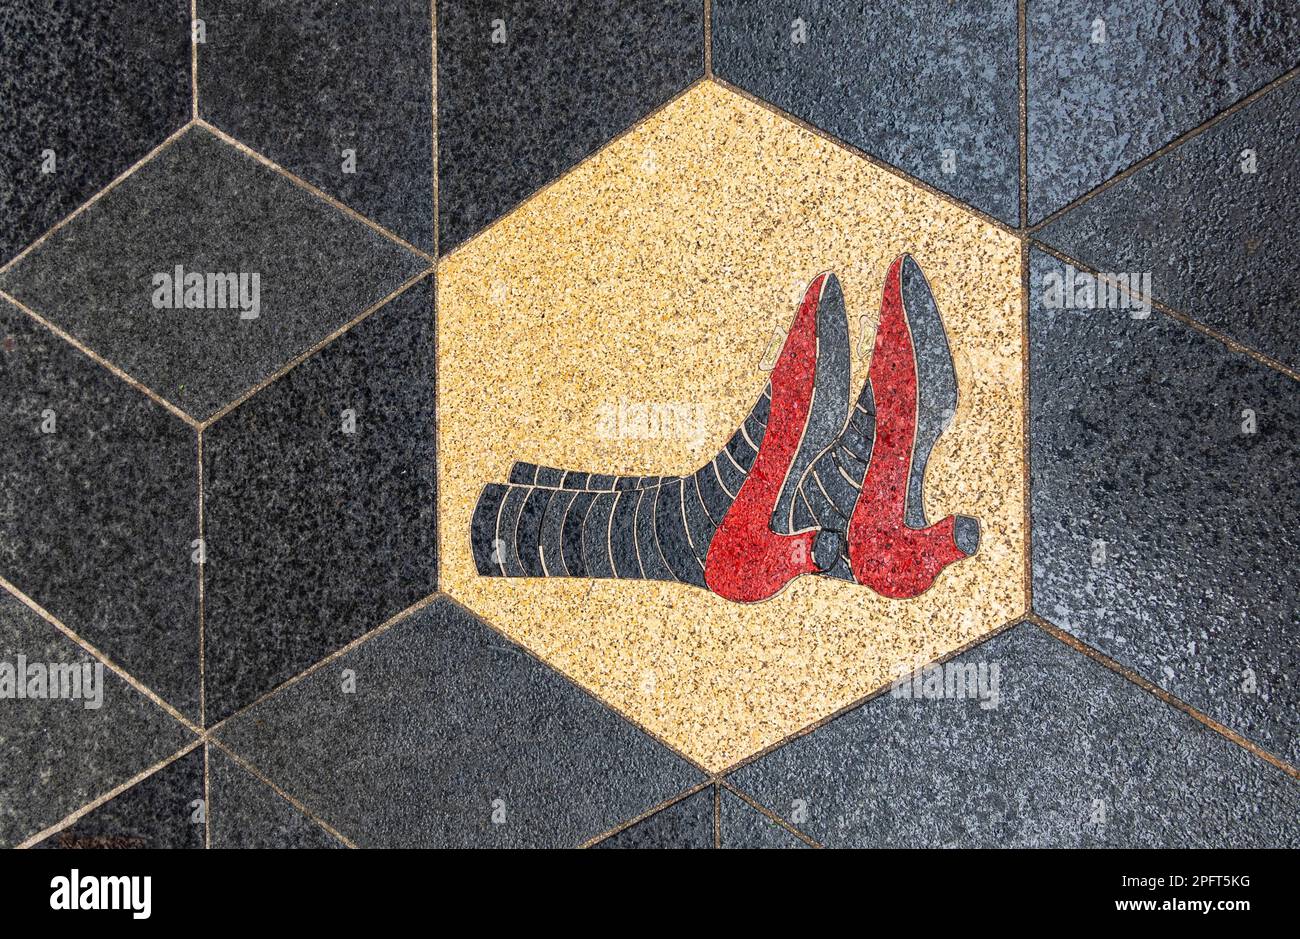 Dorothy's Ruby Slippers as pictured after the house fell on the Wicked Witch of the East in The Wizard of Oz Stock Photo